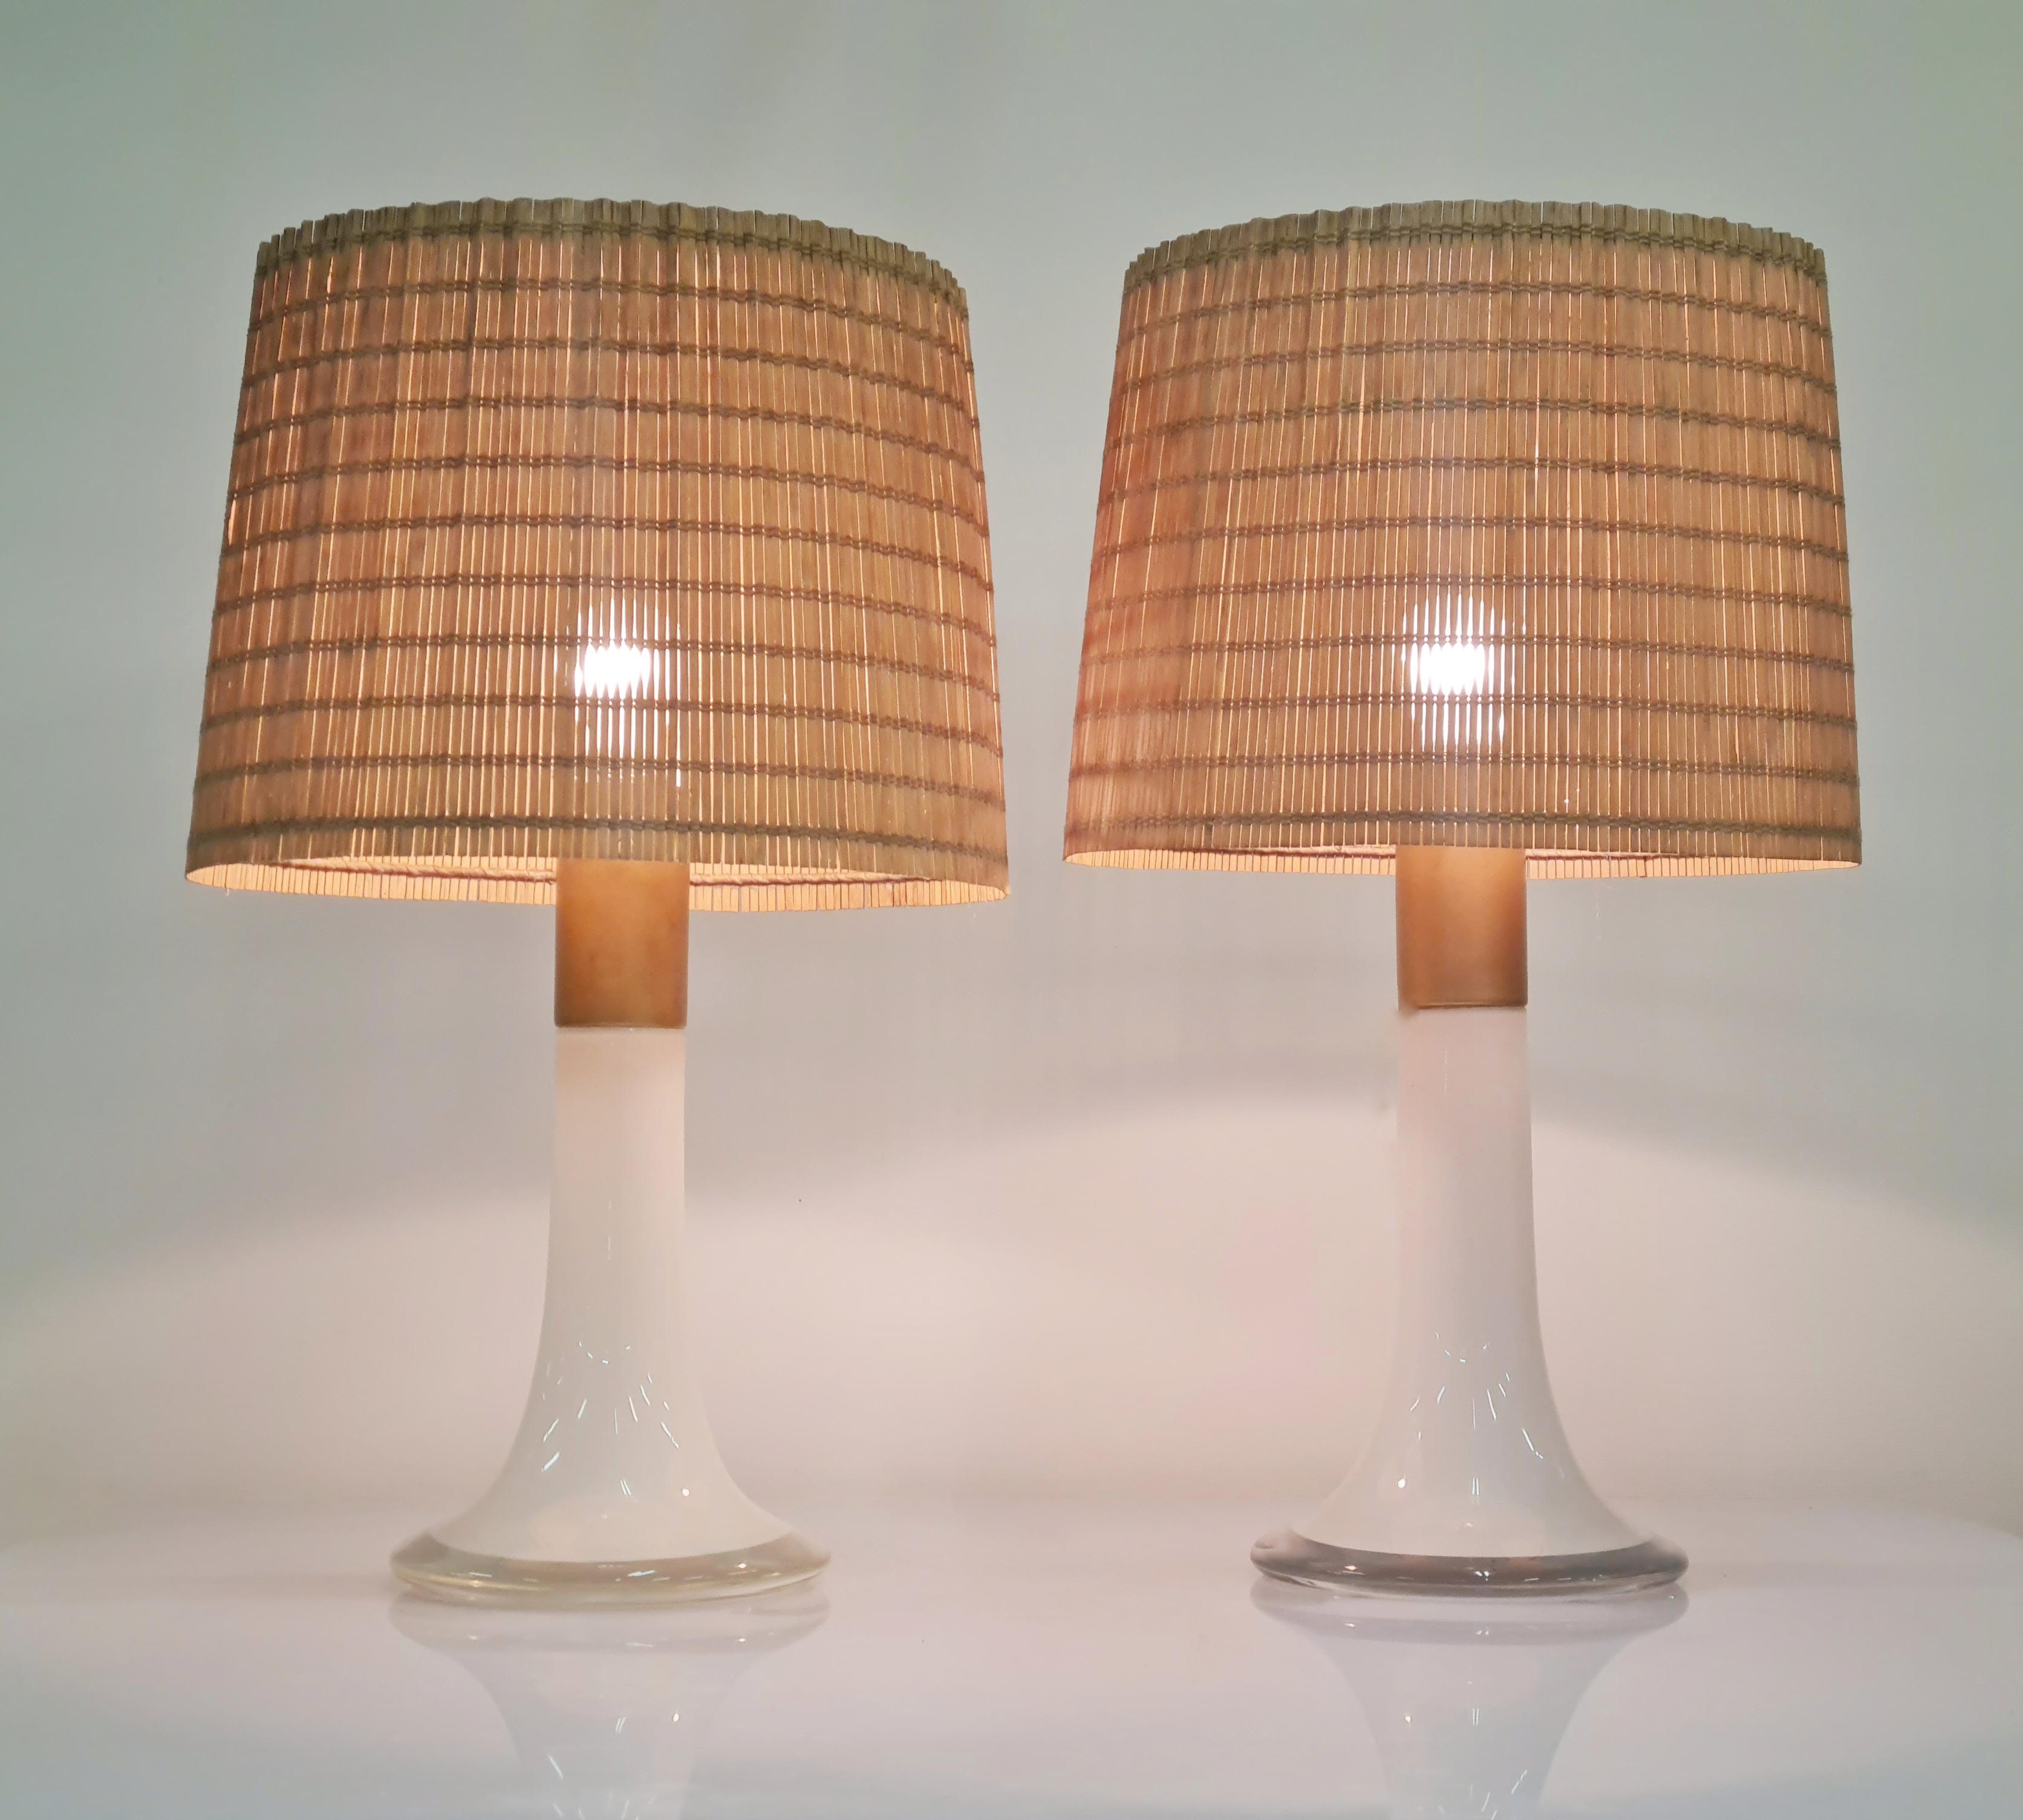 Finnish Lisa Johansson Pape Pair of Table Lamps Model 46-017, Orno 1960s For Sale